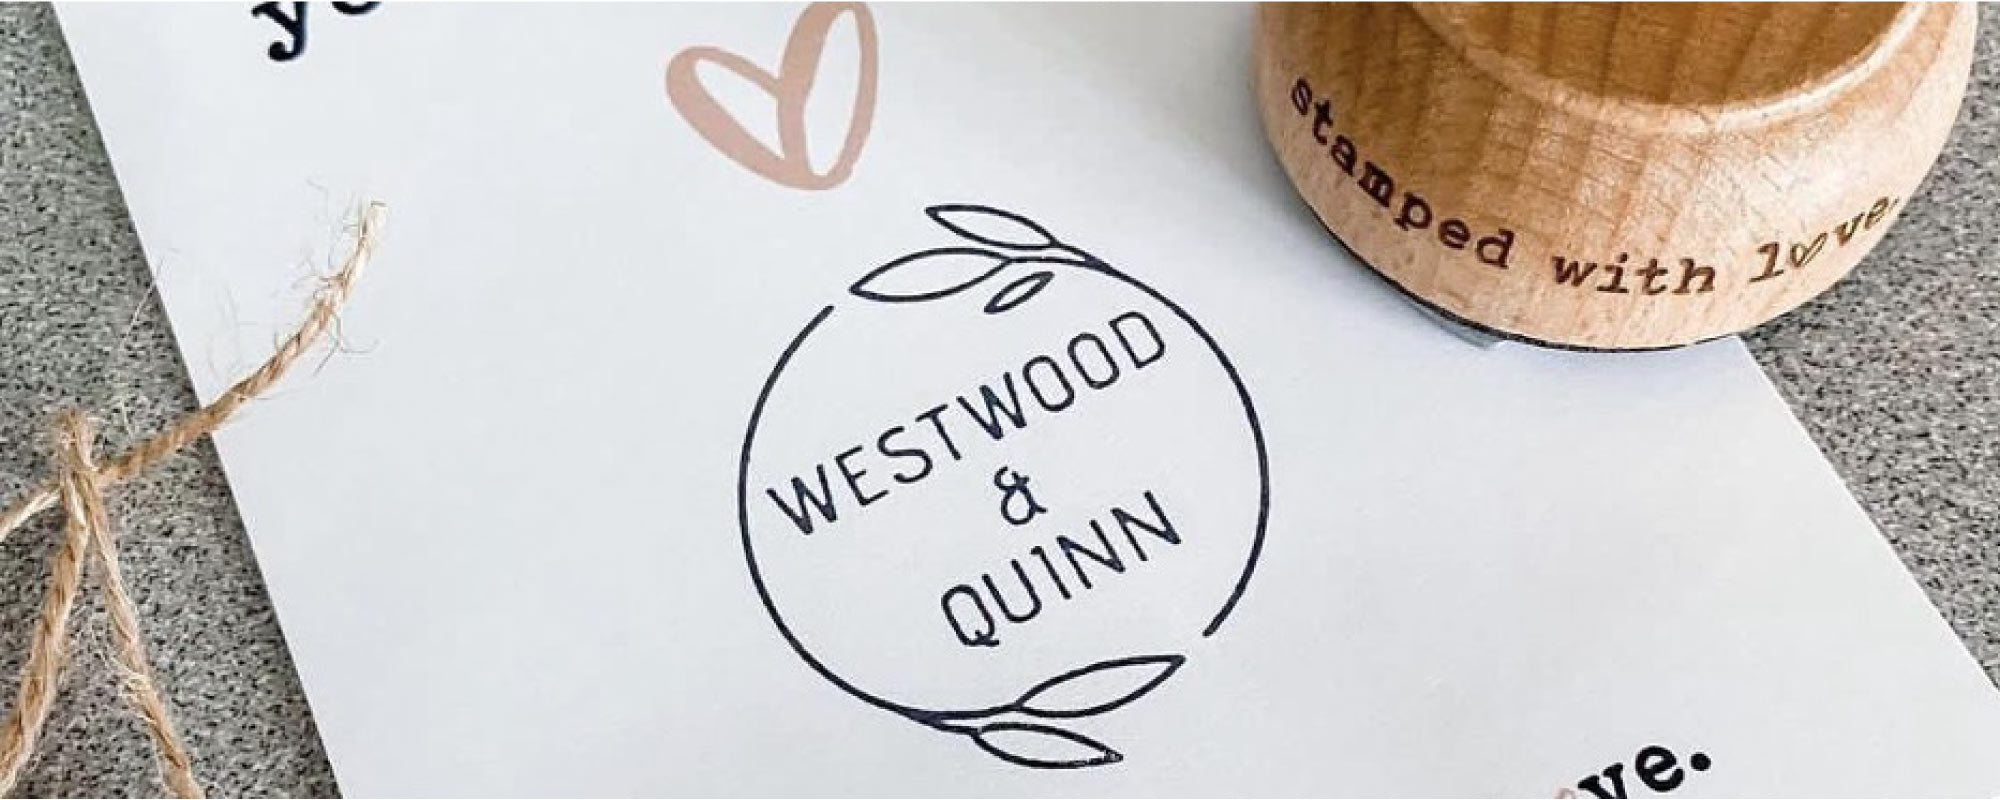 Westwood & Quinn logo imprinted with a custom rubber stamp on a card